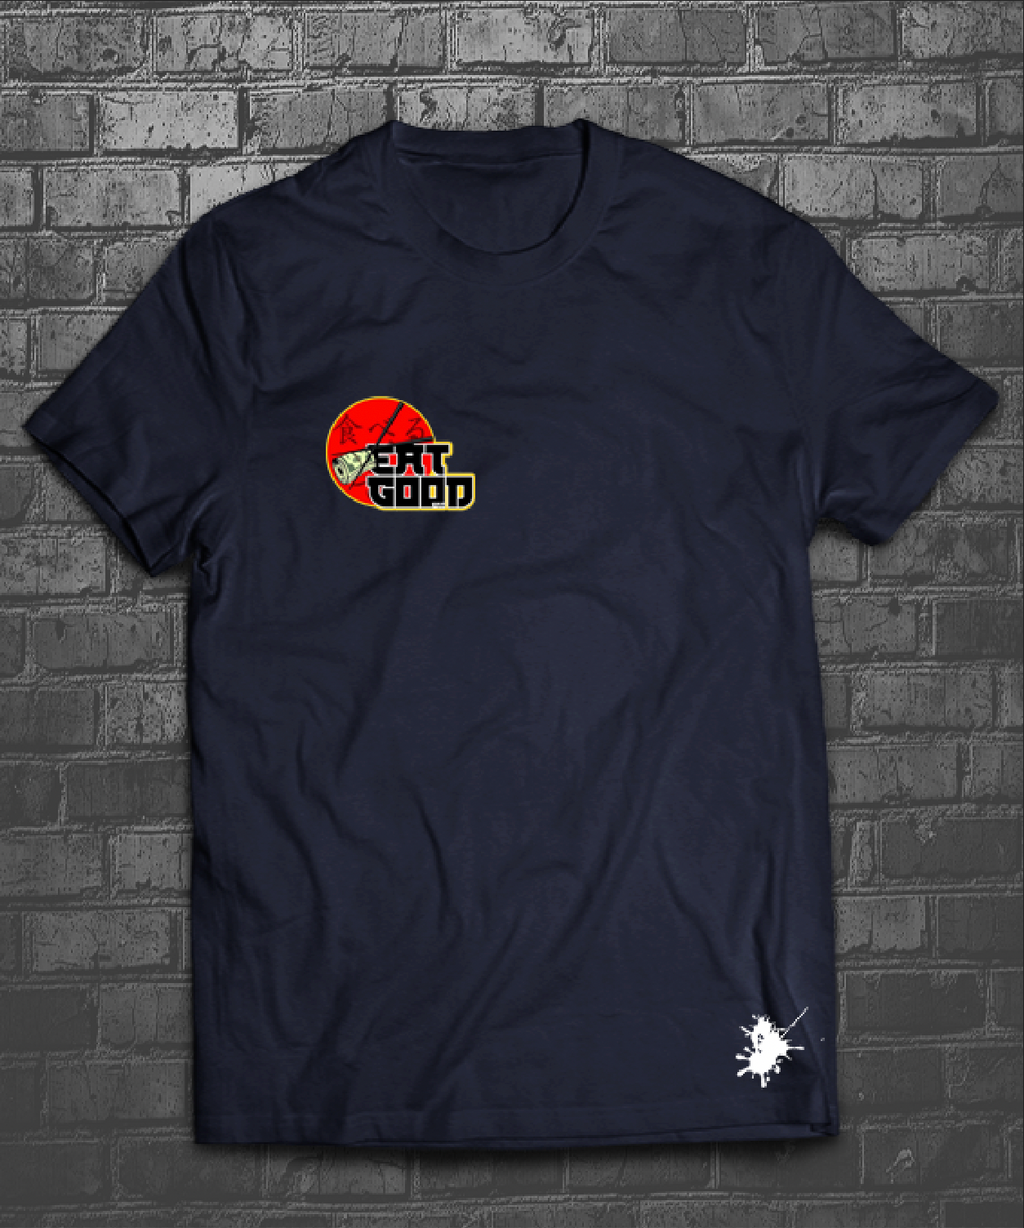 Copy of Eat Good Ent. T-shirt with little logo